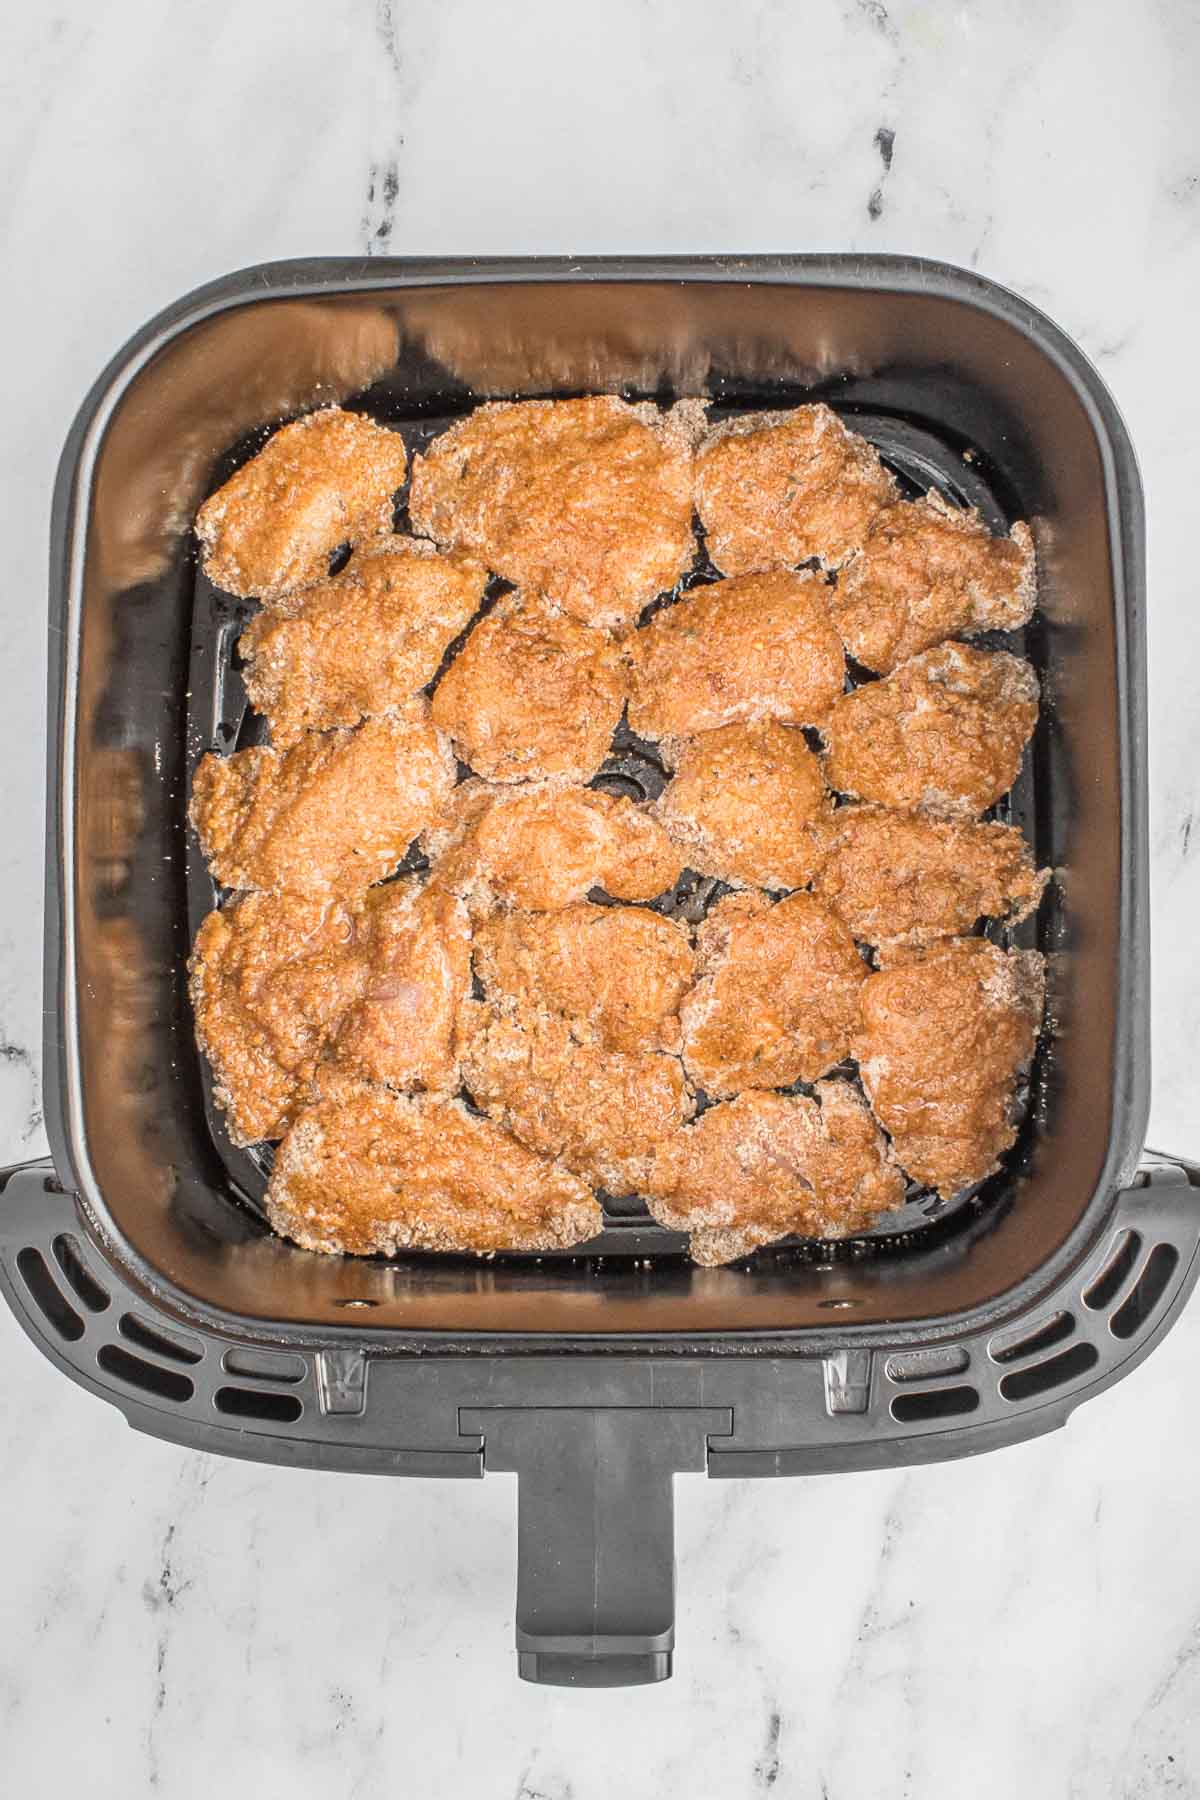 Coated chicken nuggets in air fryer.